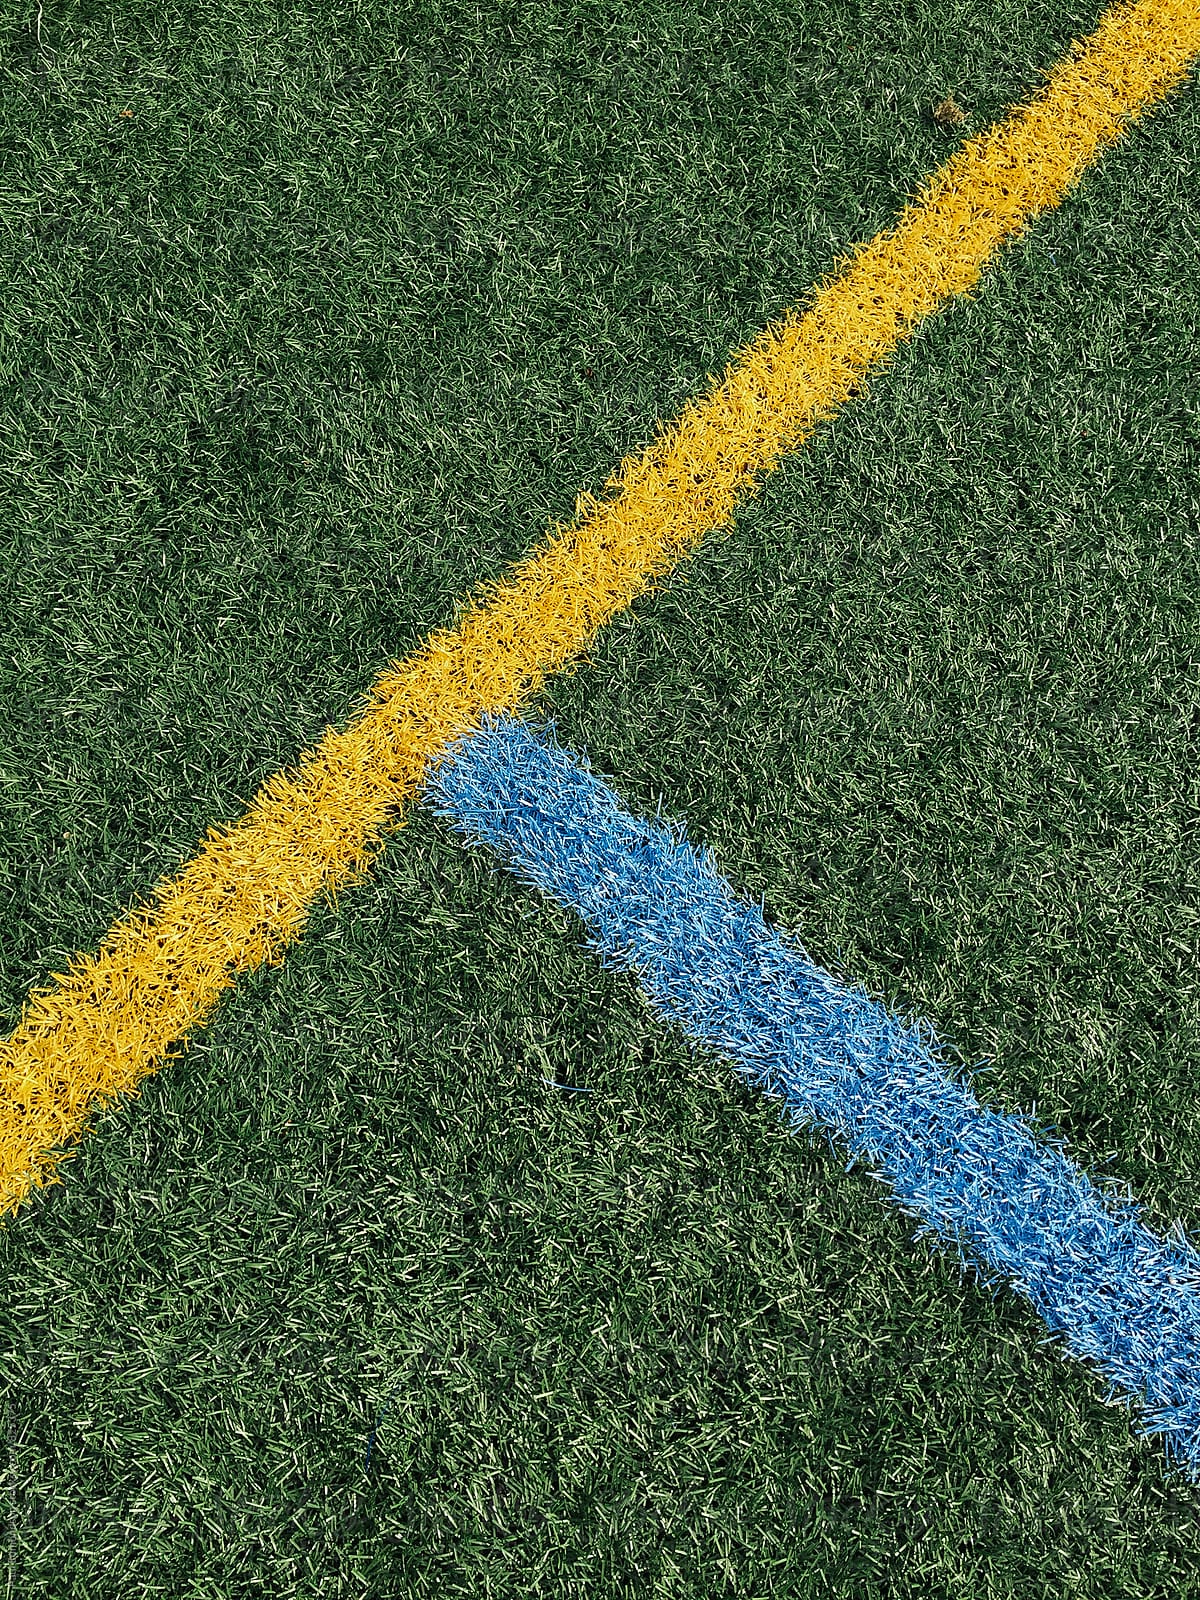 Colorful boundary lines on artificial turf sports field